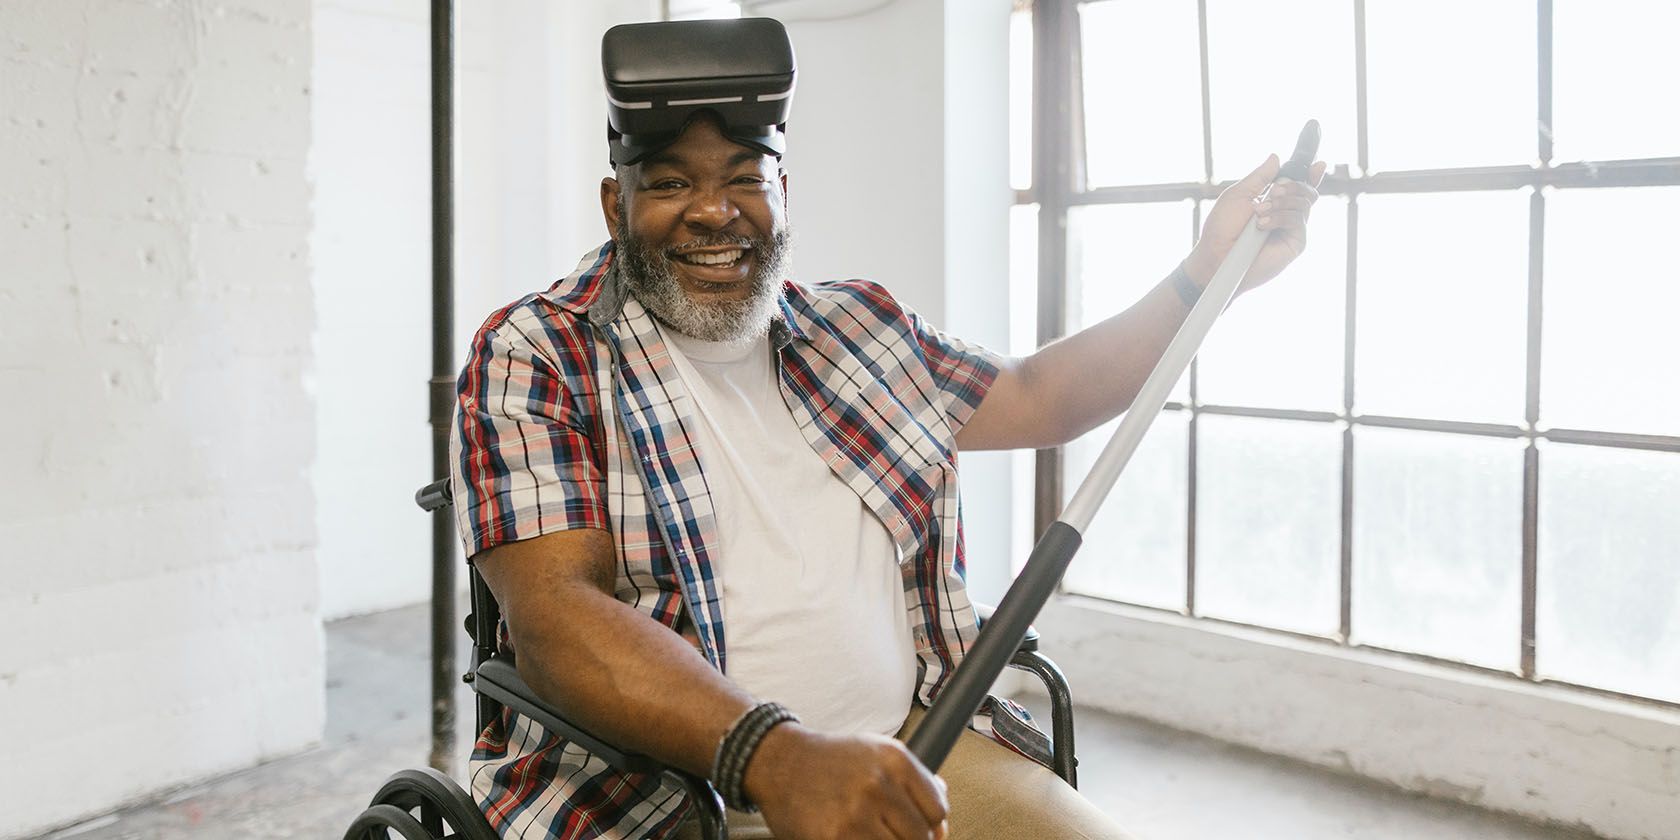 Man in Wheelchair with VR